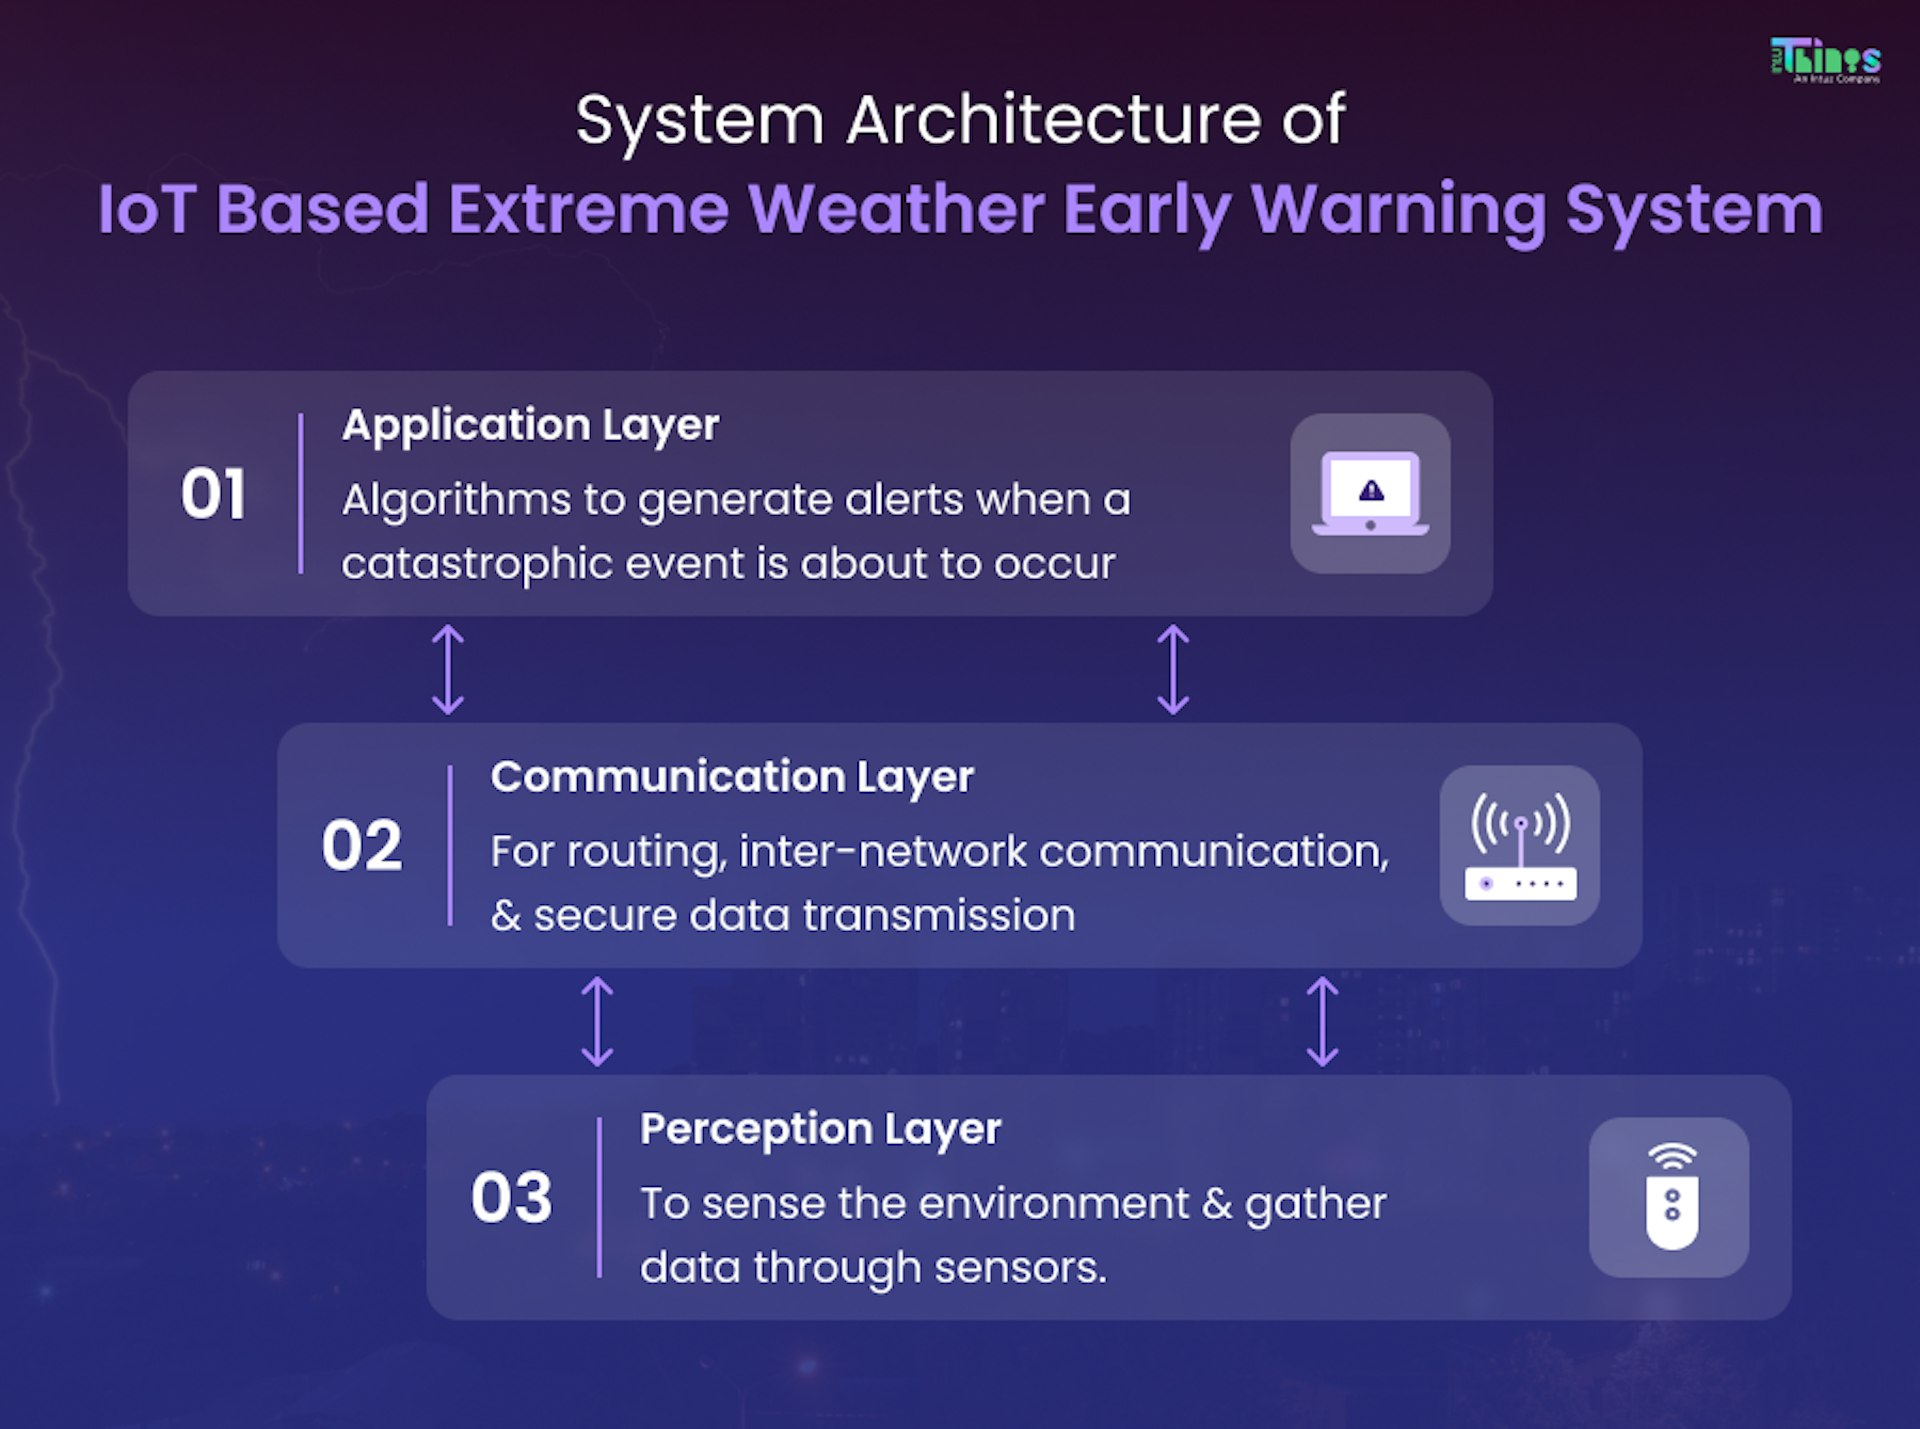 System architecture of IoT based extreme weather early warning system